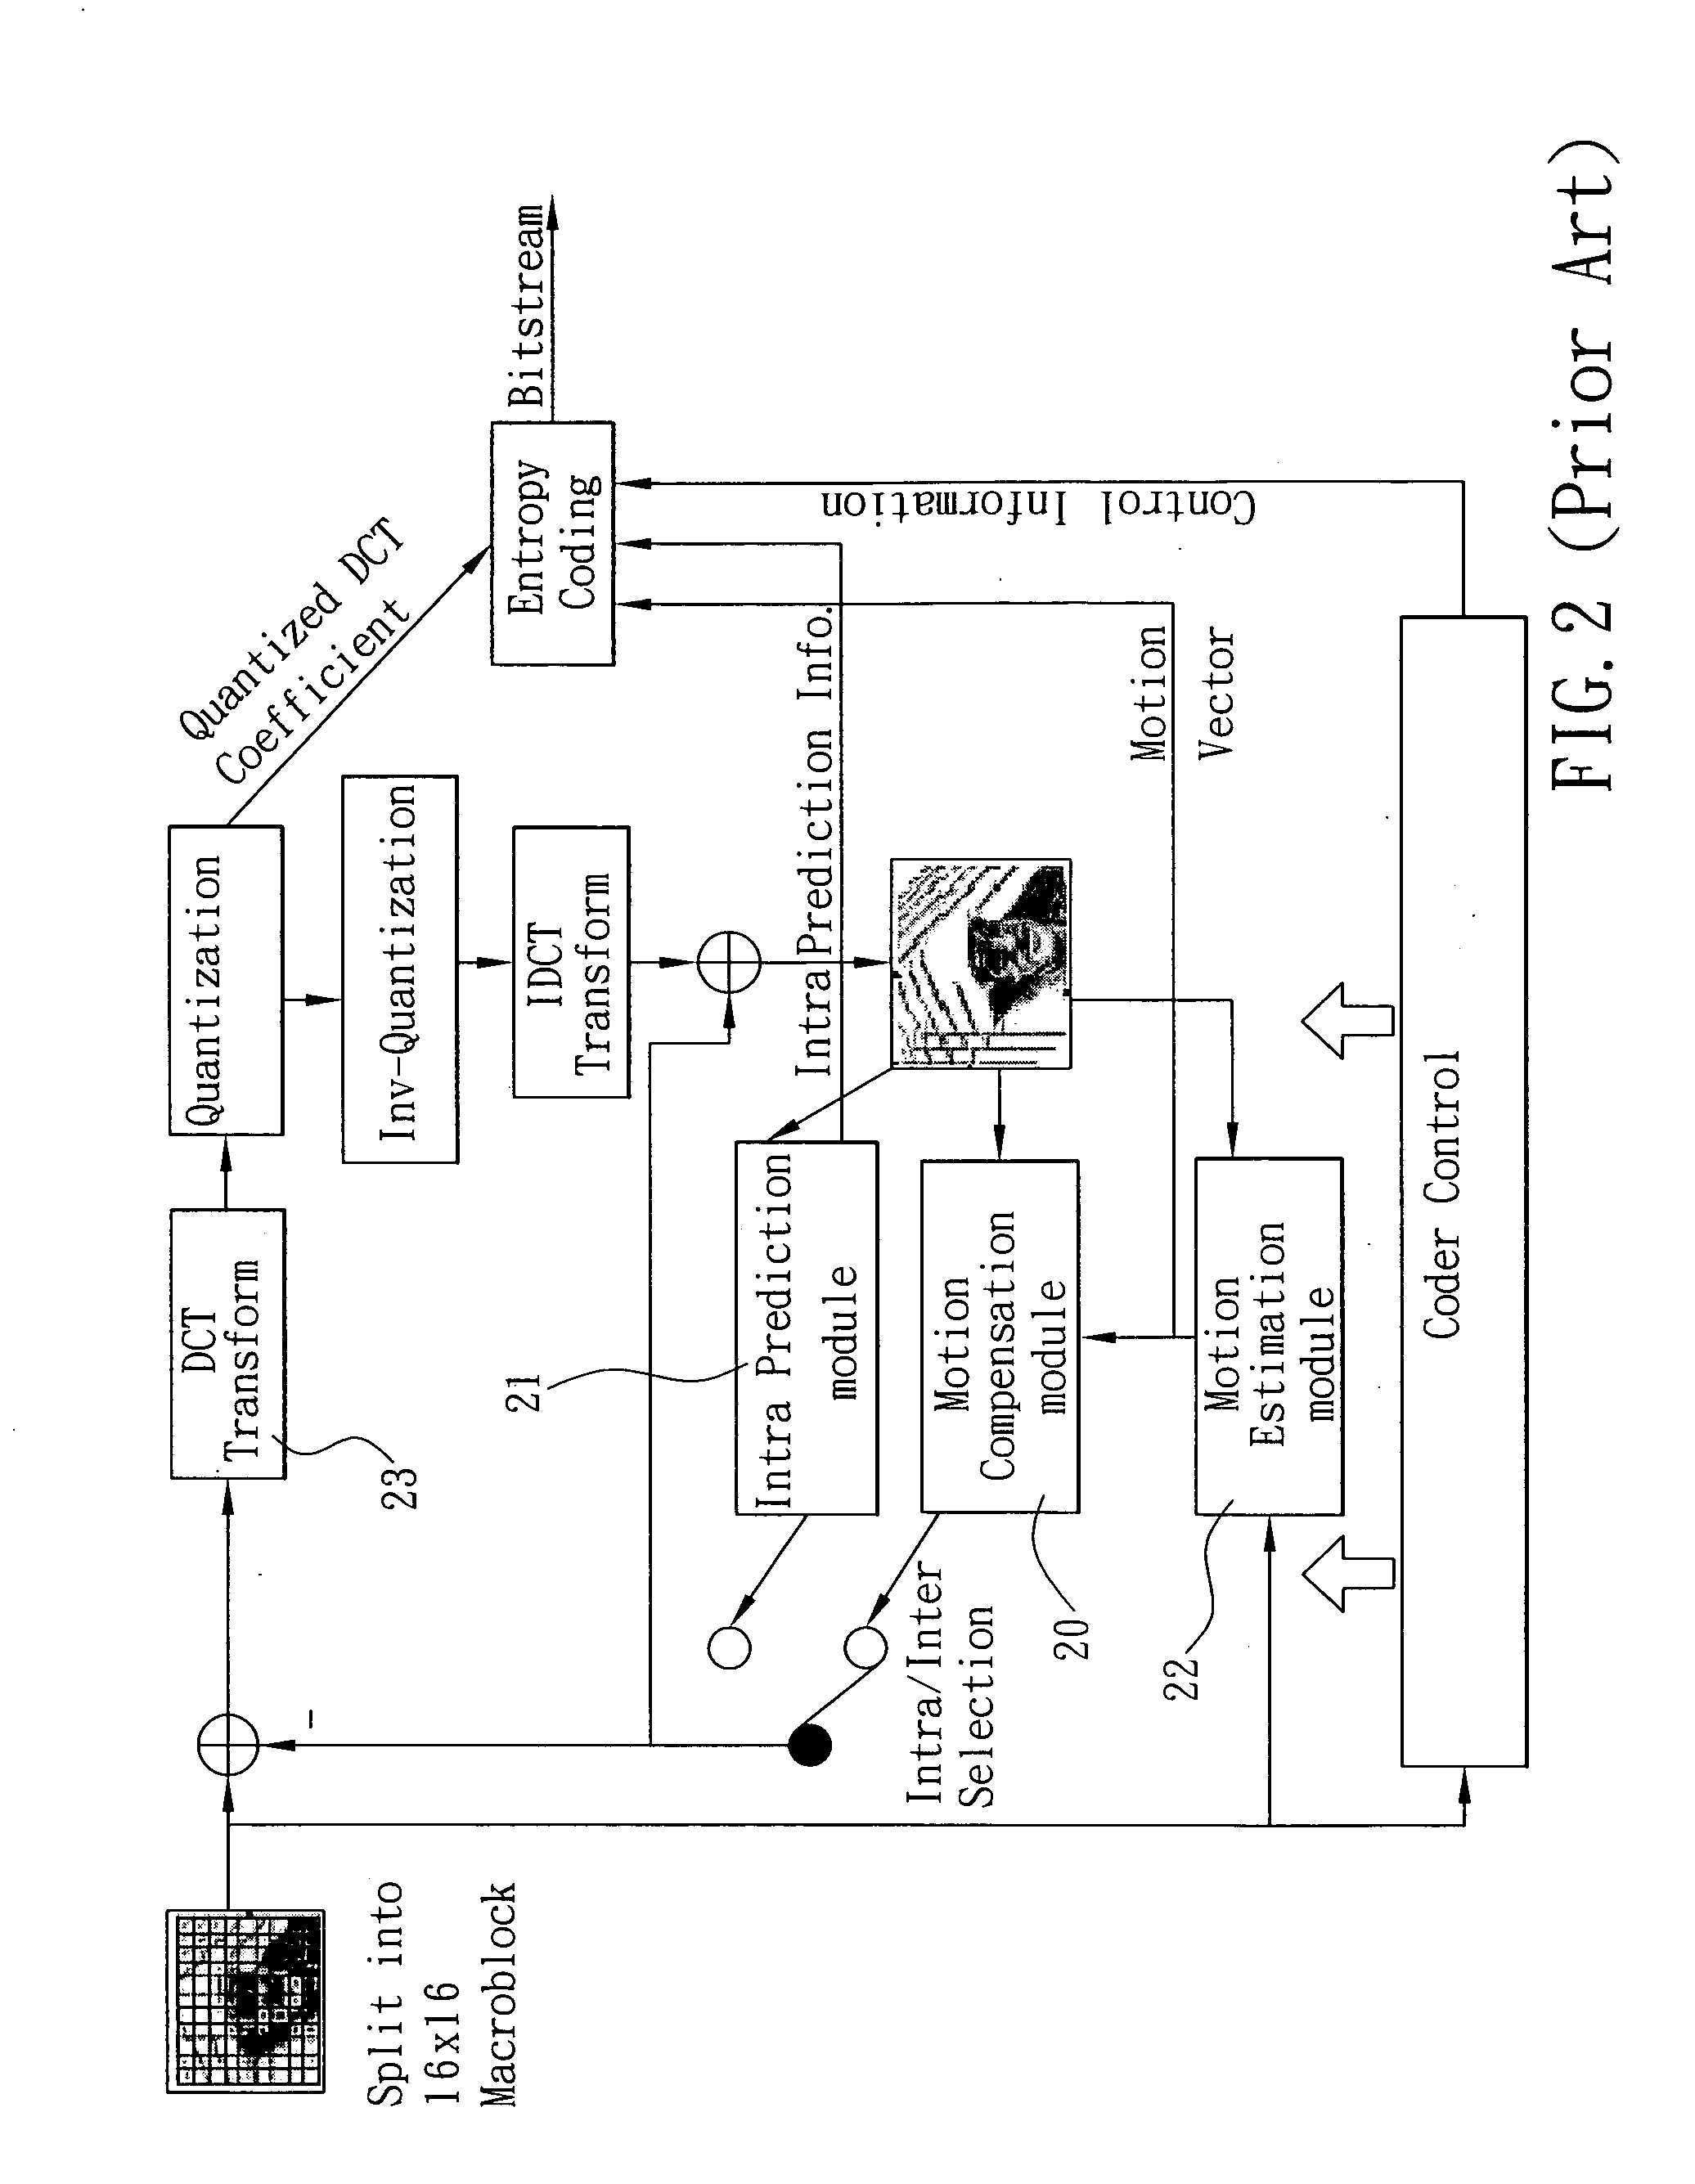 Method of parallelly filtering input data words to obtain final output data words containing packed half-pel pixels